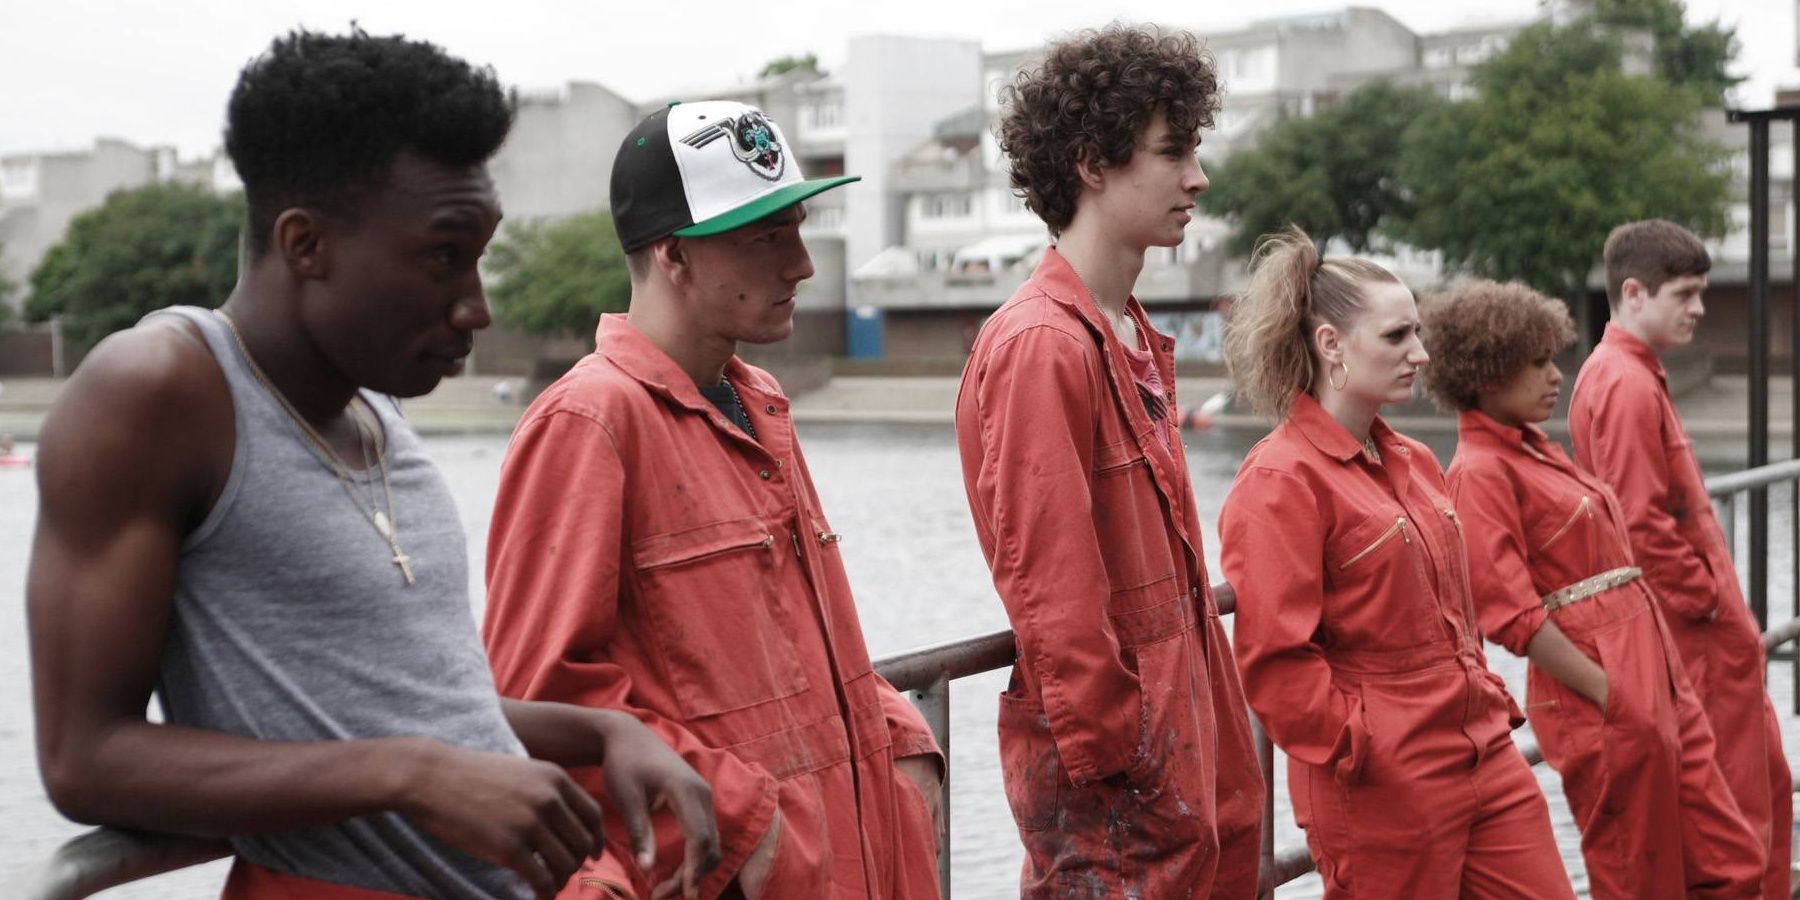 Misfits,cast standing next to each other